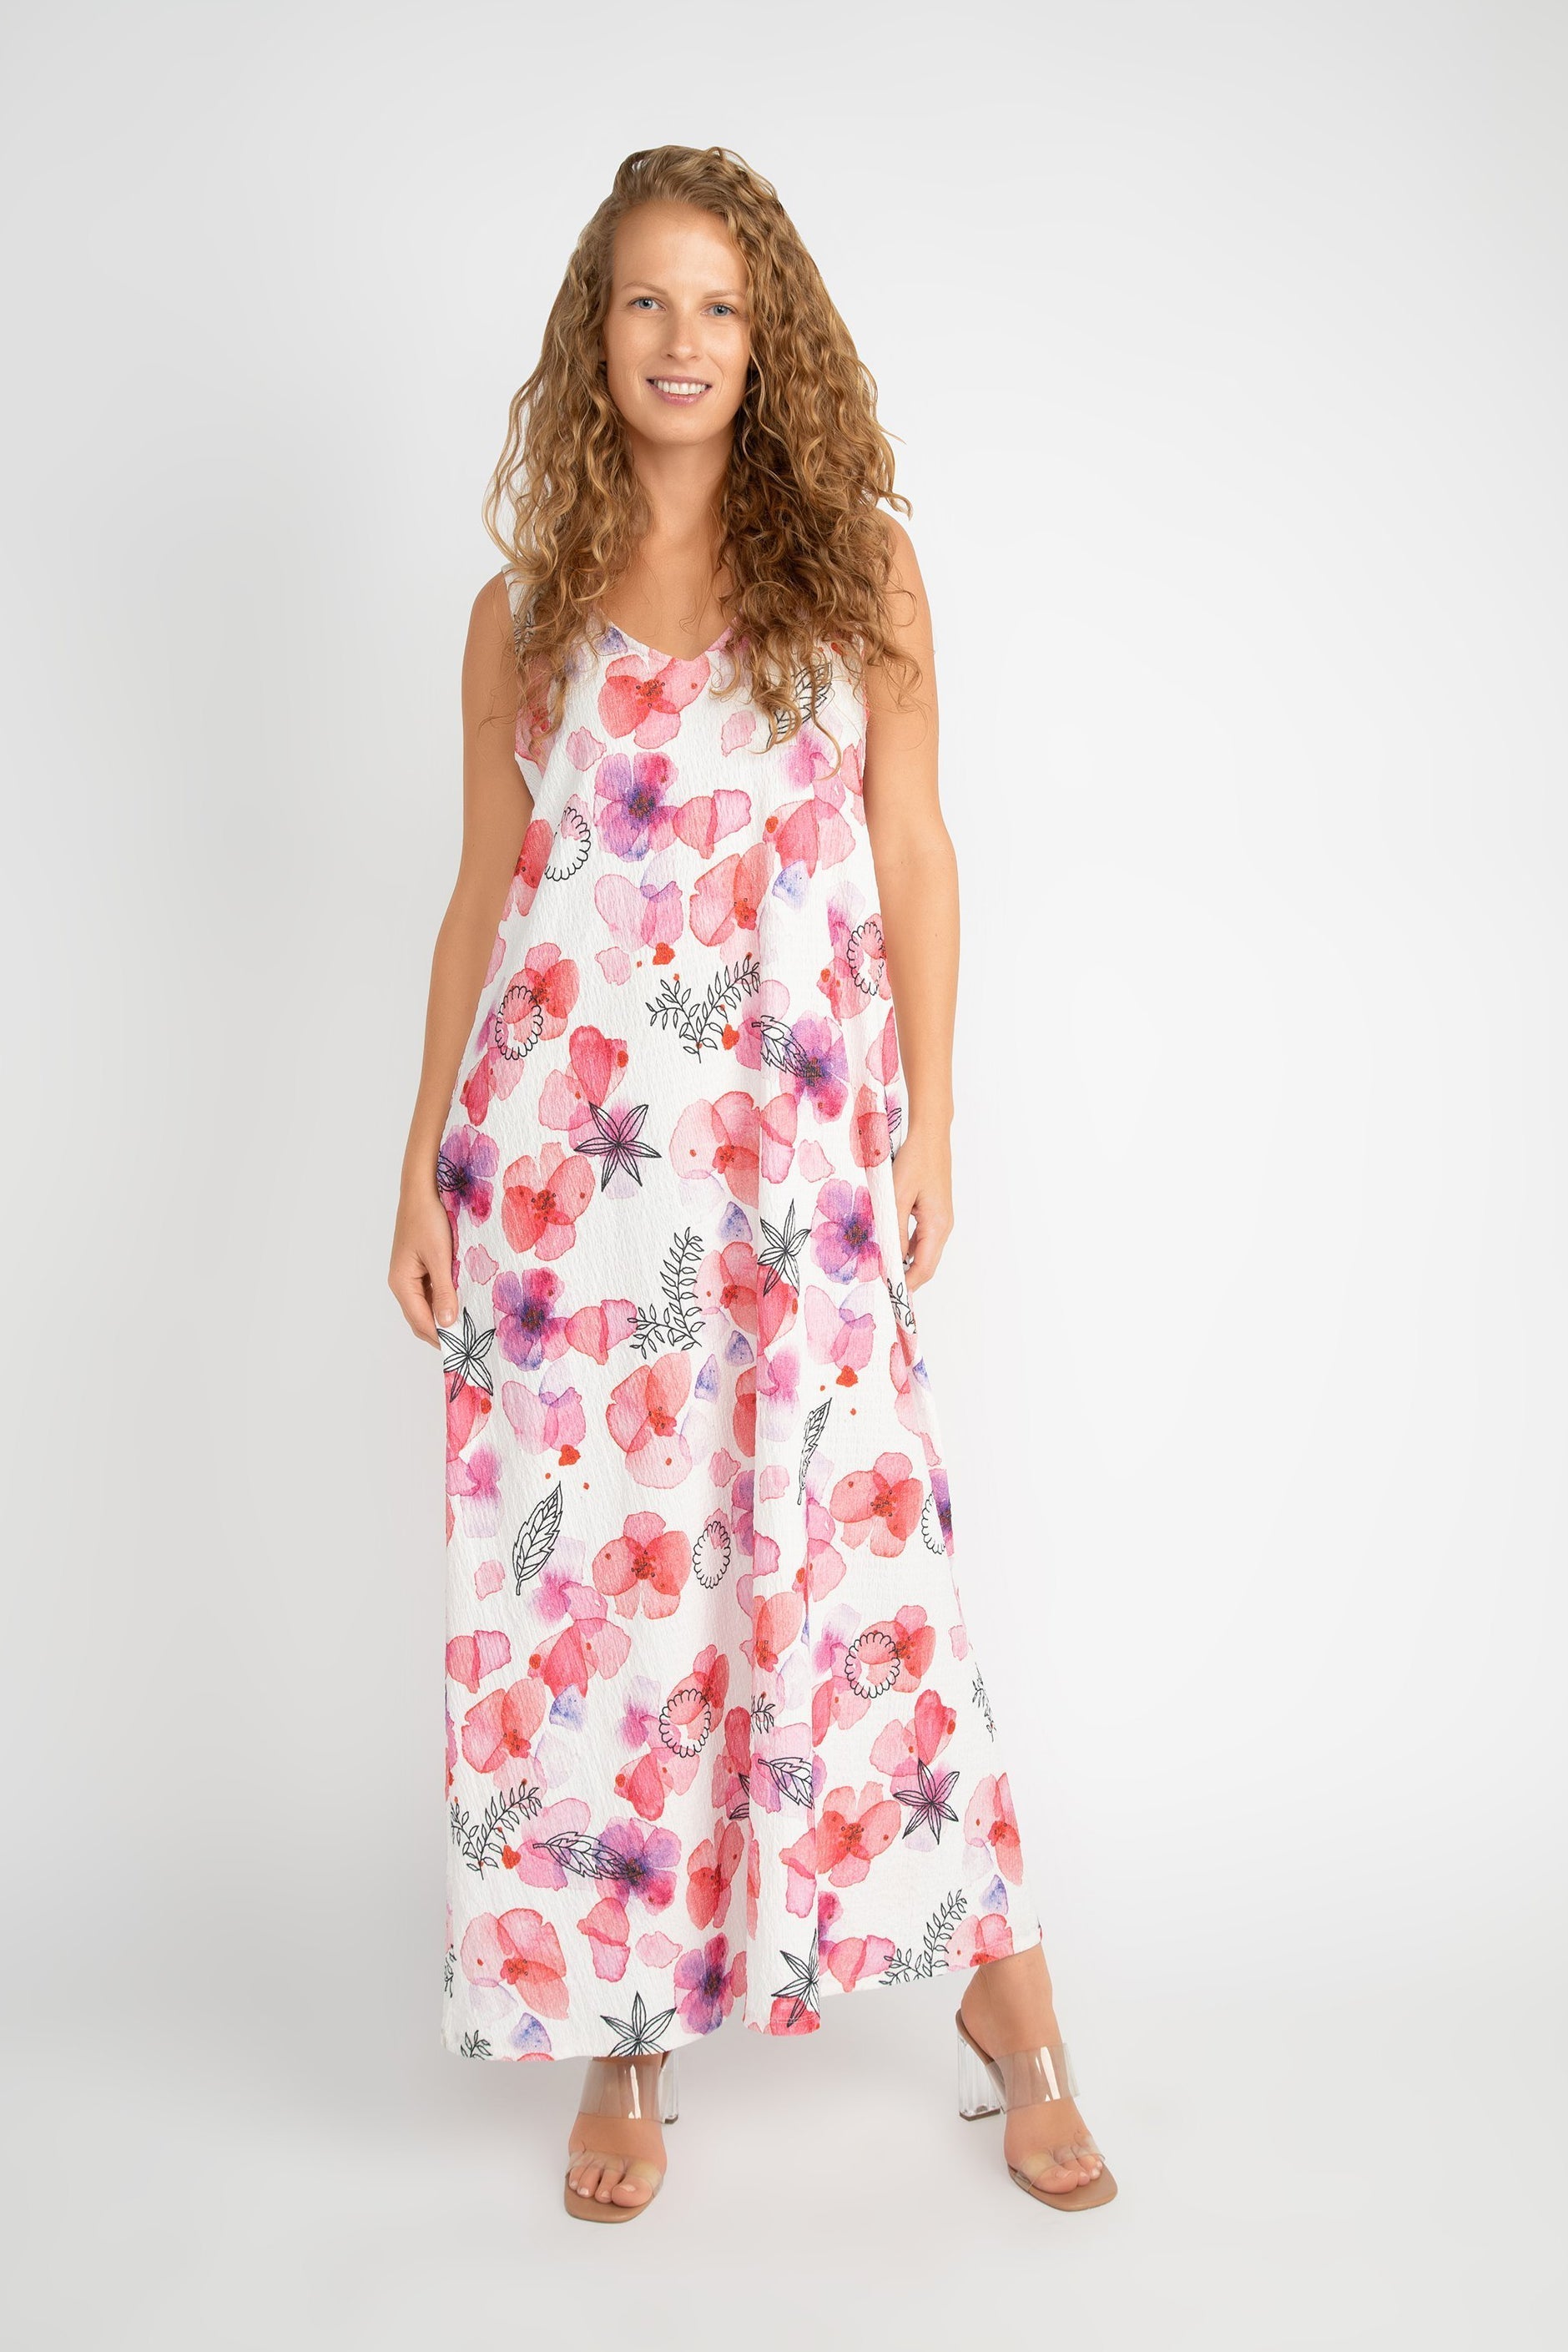 Compli K (33565) Women's Sleeveless V-neck Printed Maxi Dress in a White with Pink Florals and Black Illustrations